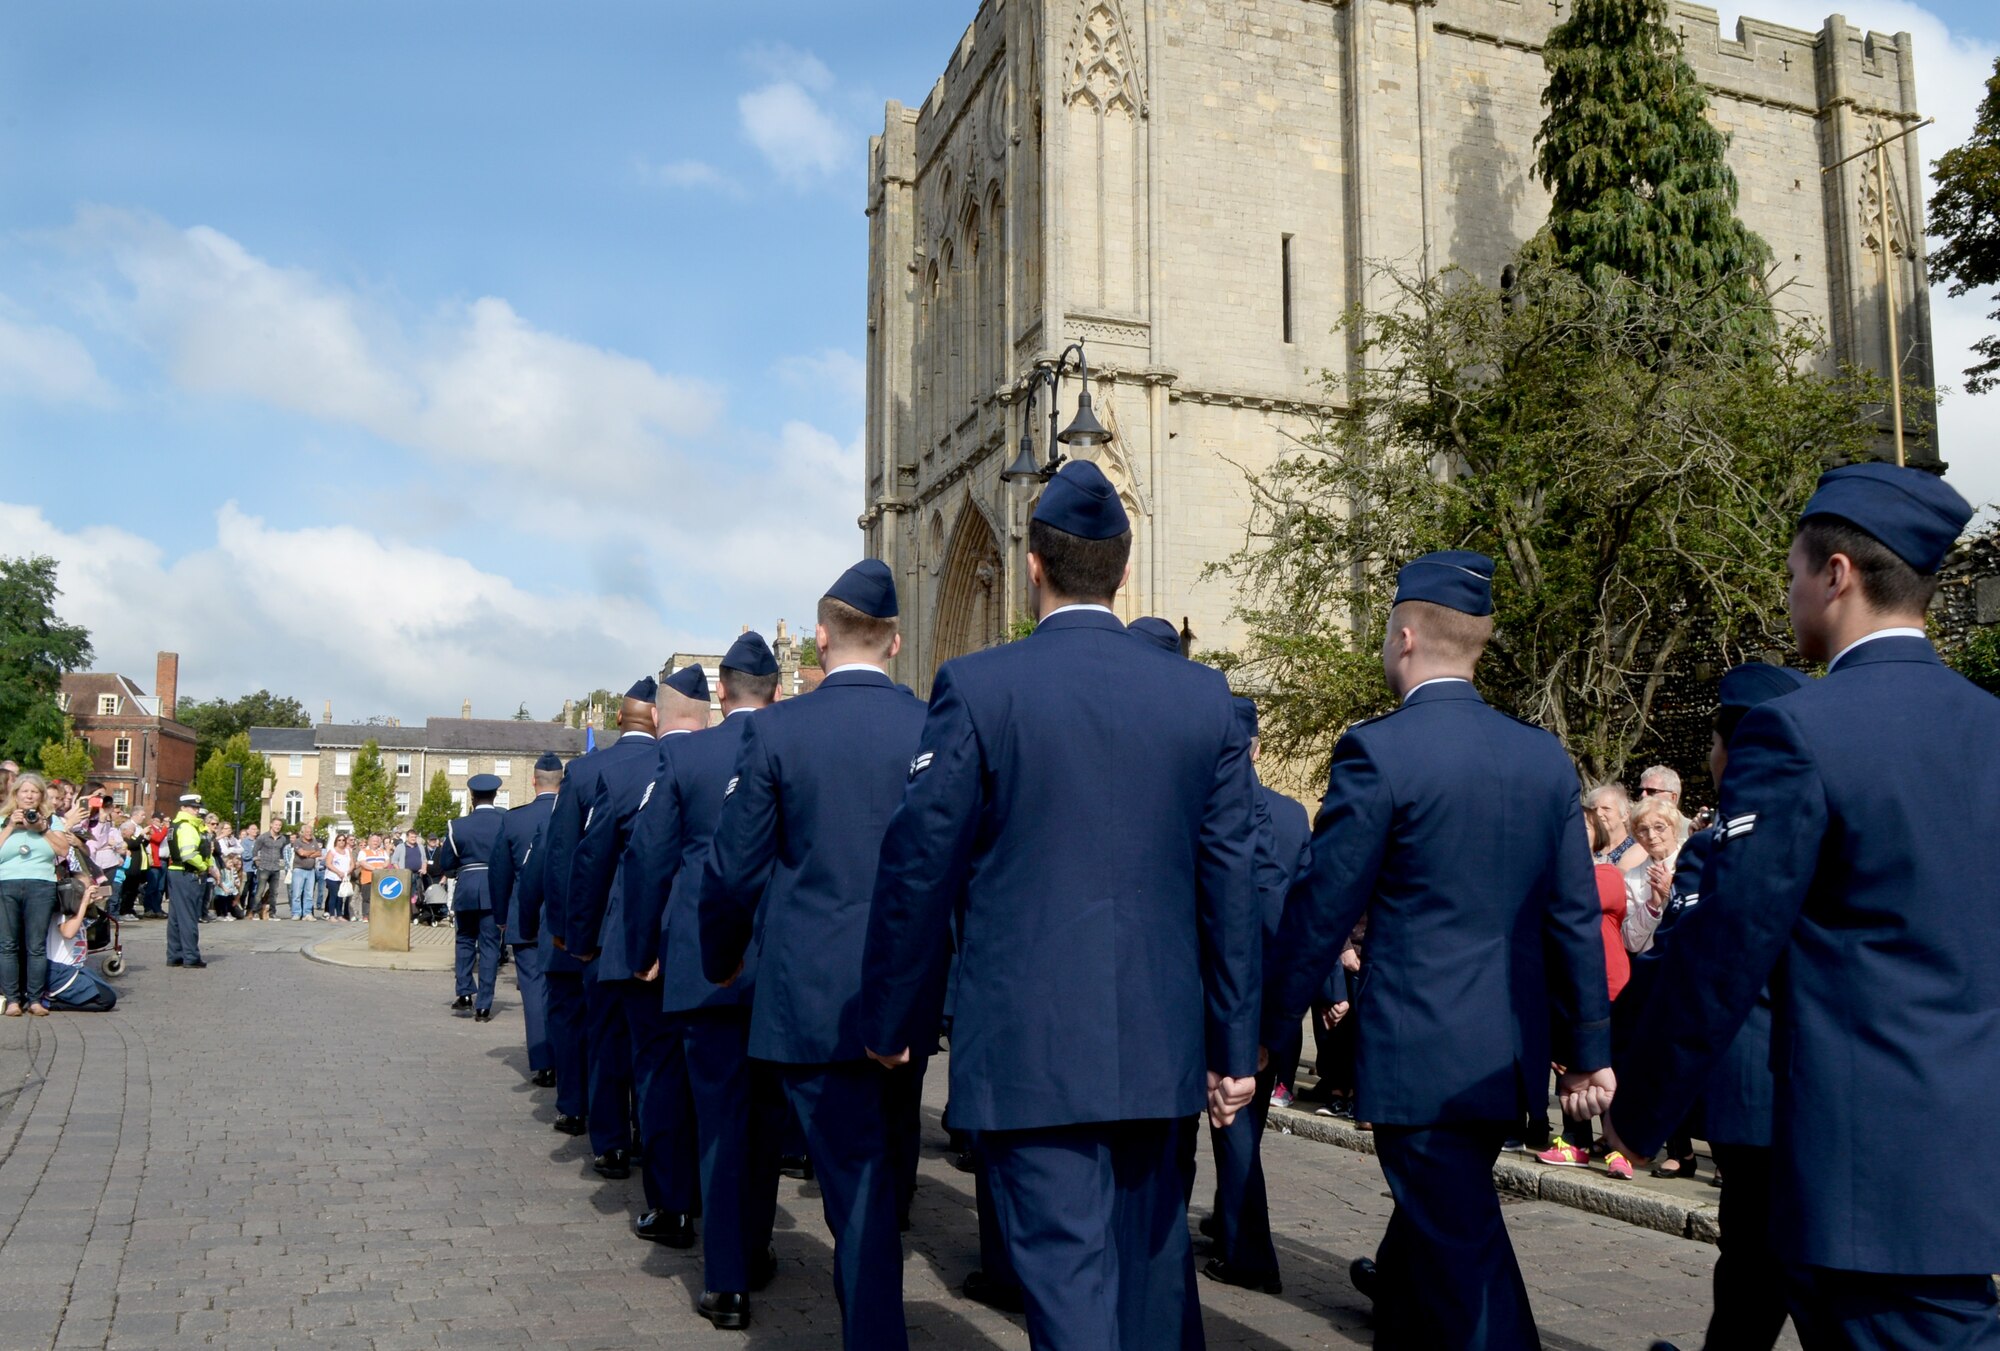 A flight of U.S. Air Force Airmen march along the road during the Battle of Britain parade Sept. 19, 2016, in Bury St. Edmunds, England. The Battle of Britain is a historical event that occurred during World War II during which the Royal Air Force defended the U.K. against the German air force.  (U.S. Air Force photo by Airman 1st Class Tenley Long)